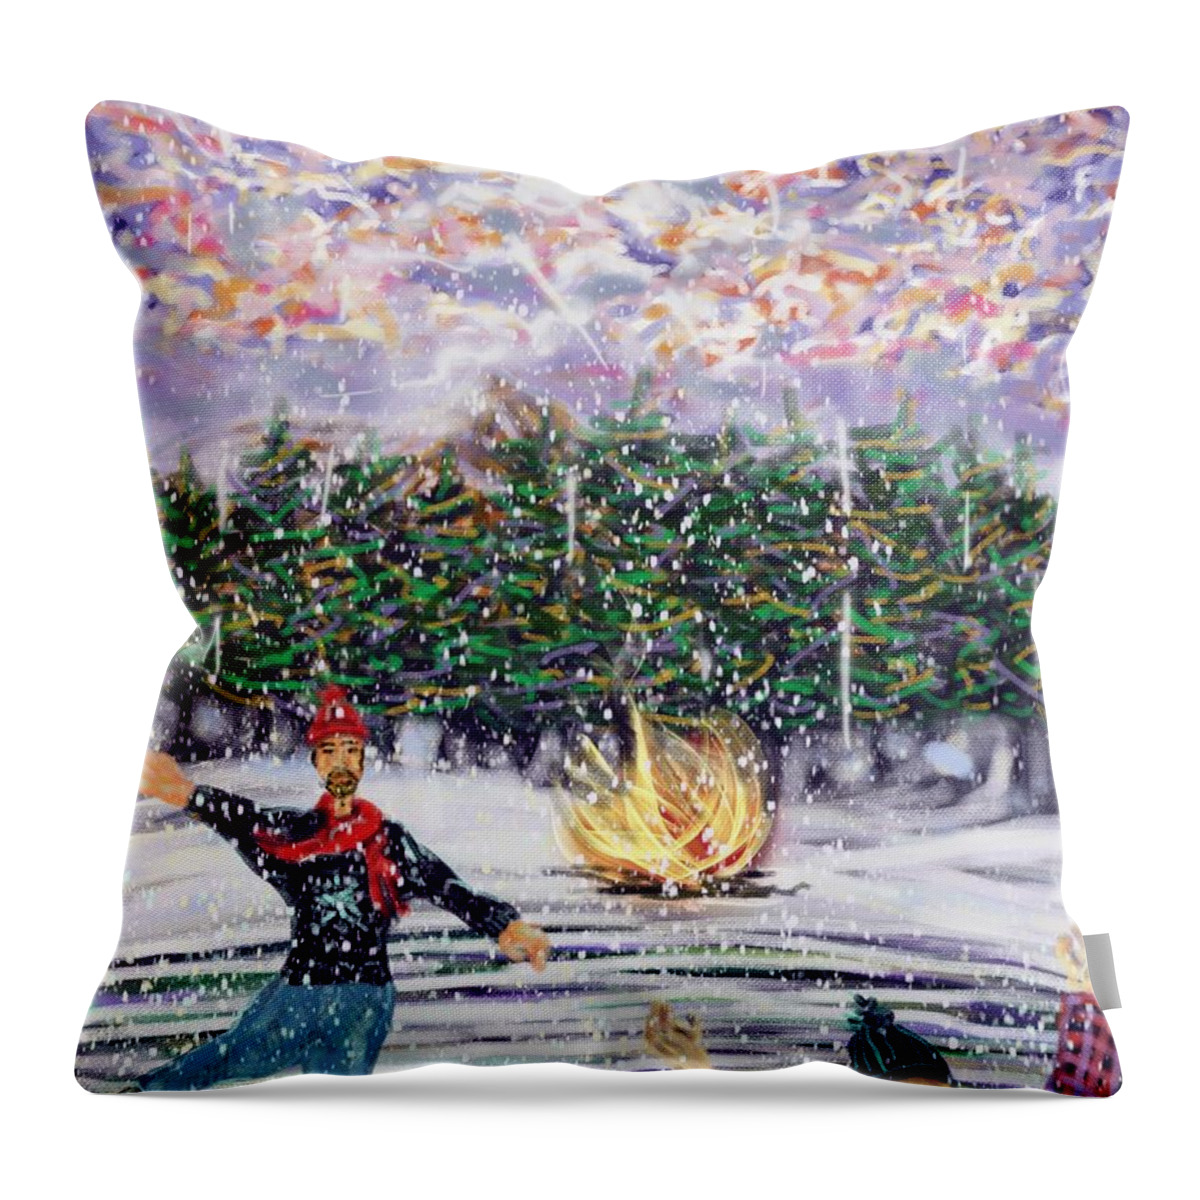 Ice Skating Throw Pillow featuring the digital art Ice Skating by Angela Weddle